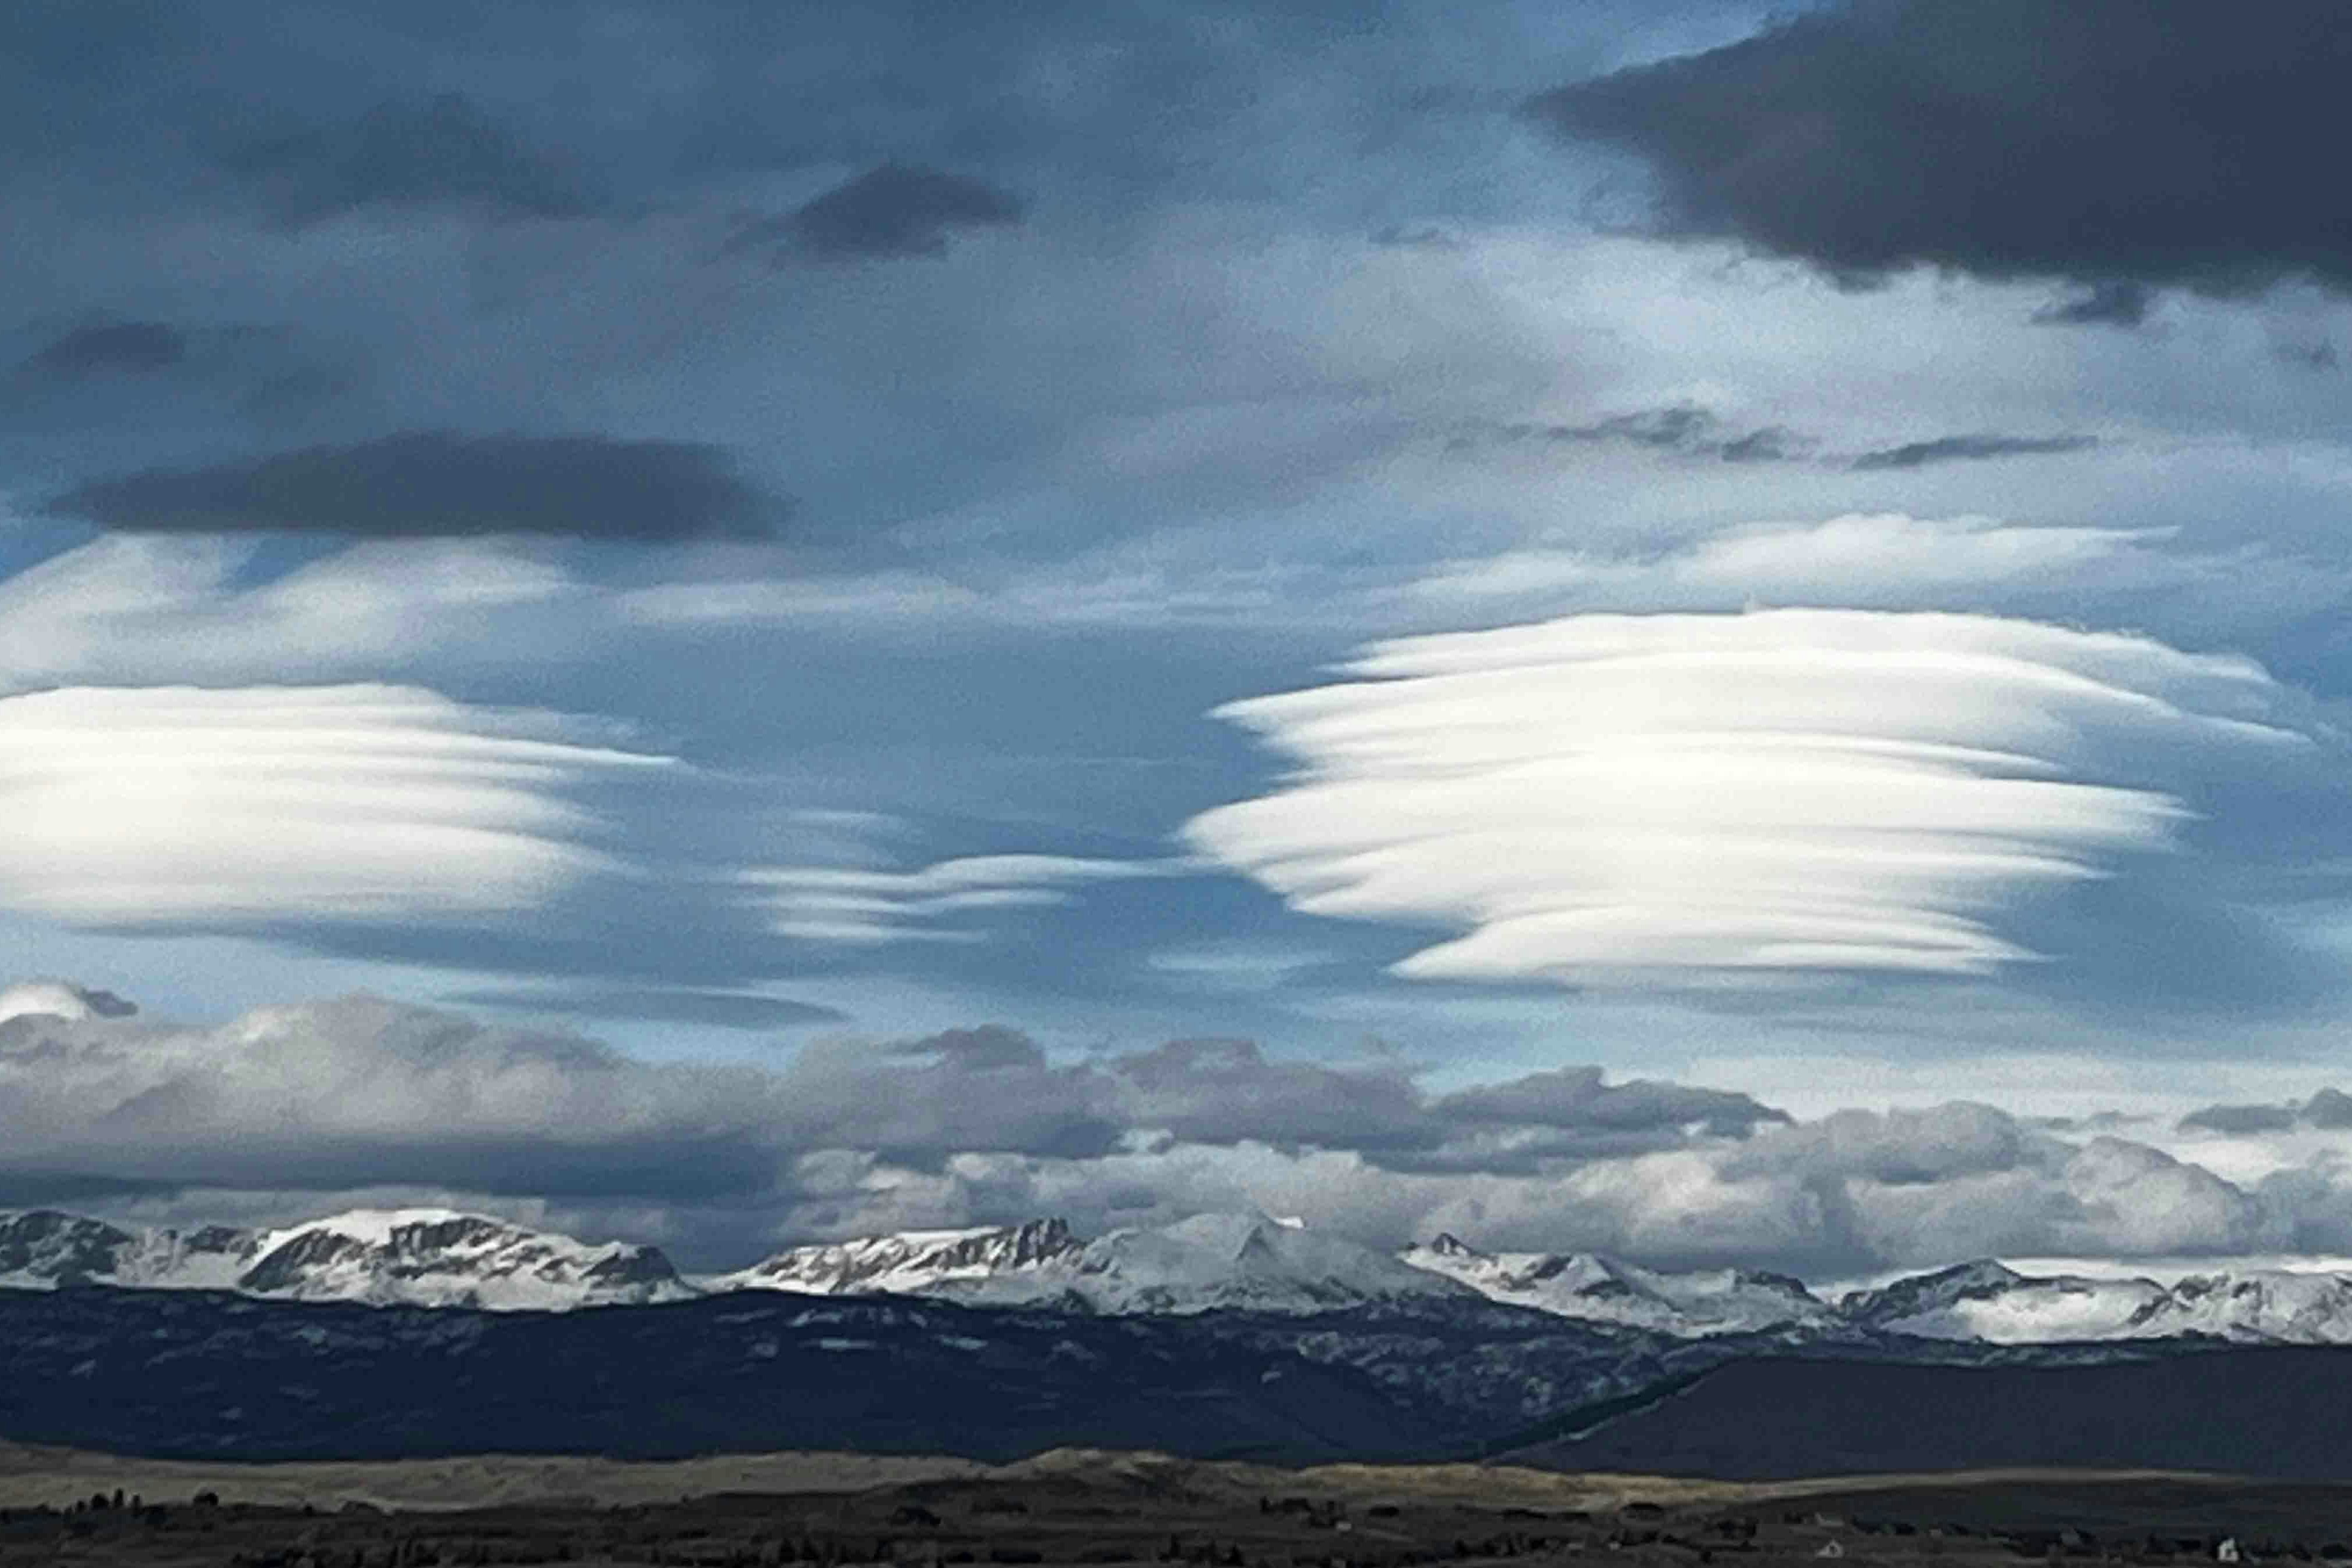 "Lenticular clouds that quickly formed then dissipated just as fast over Wind River mountains just after 7 PM on Tuesday, 4/16/24"